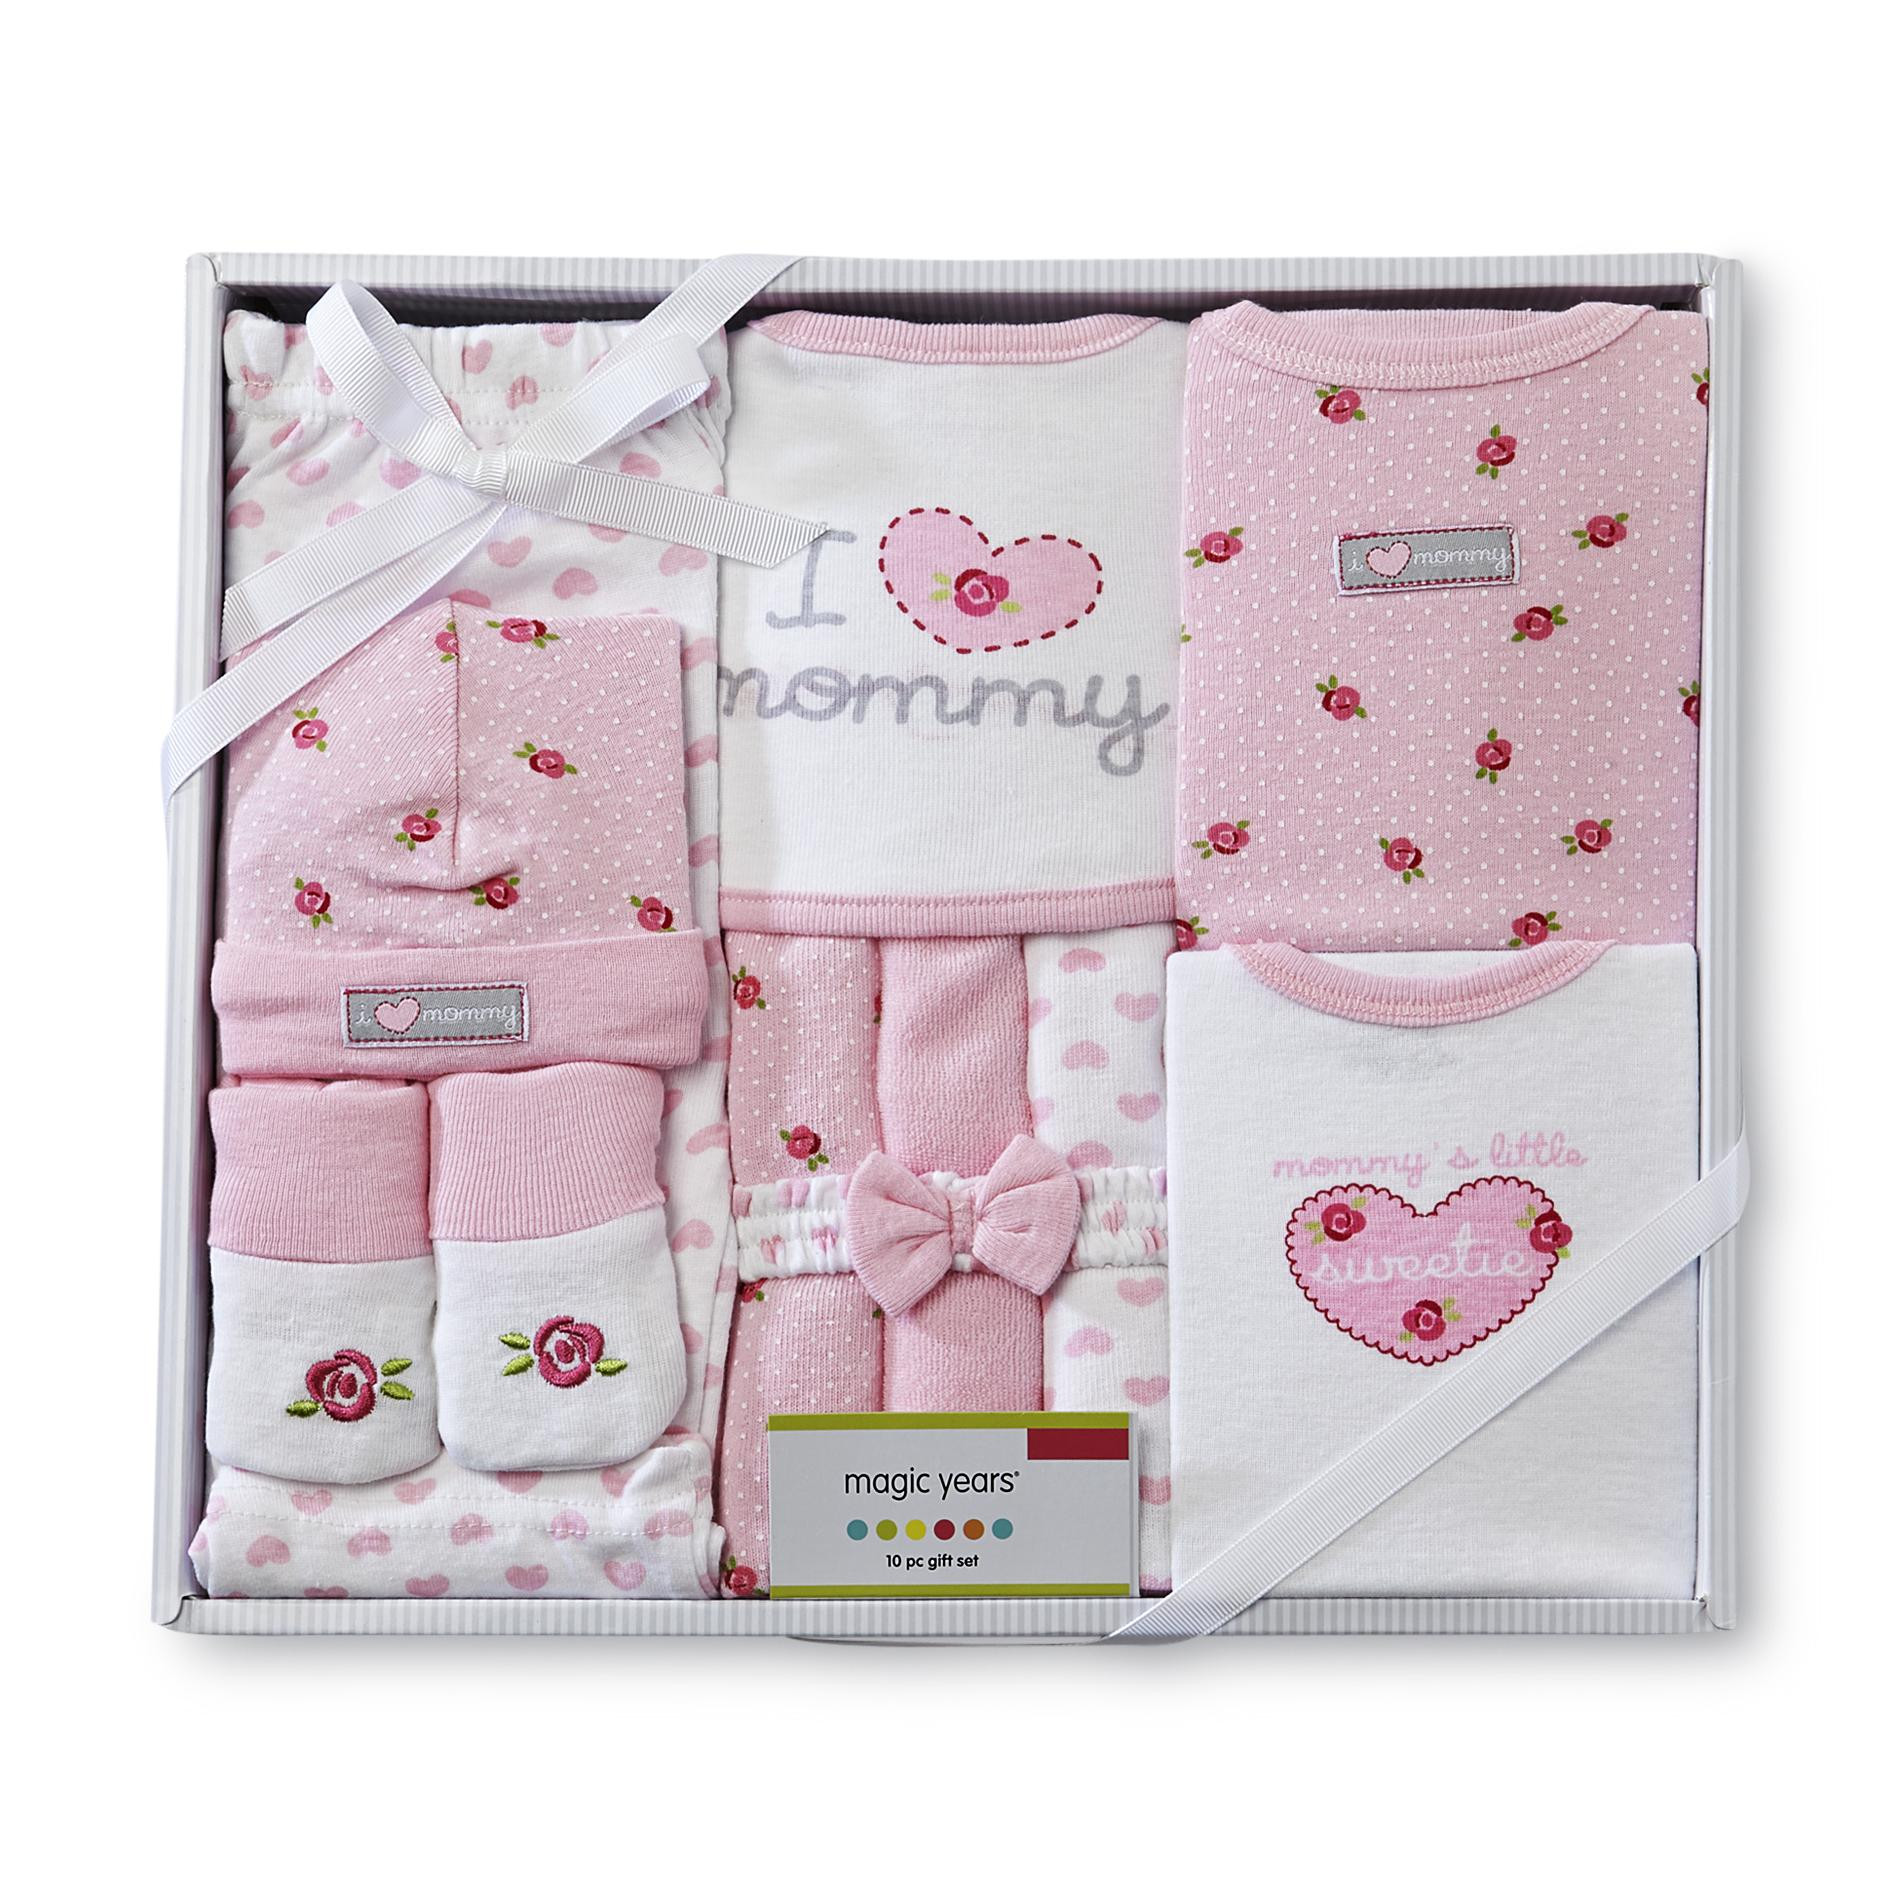 Newborn Baby Gift Sets
 Magic Years Infant Girl s 10 Piece Clothing Gift Set